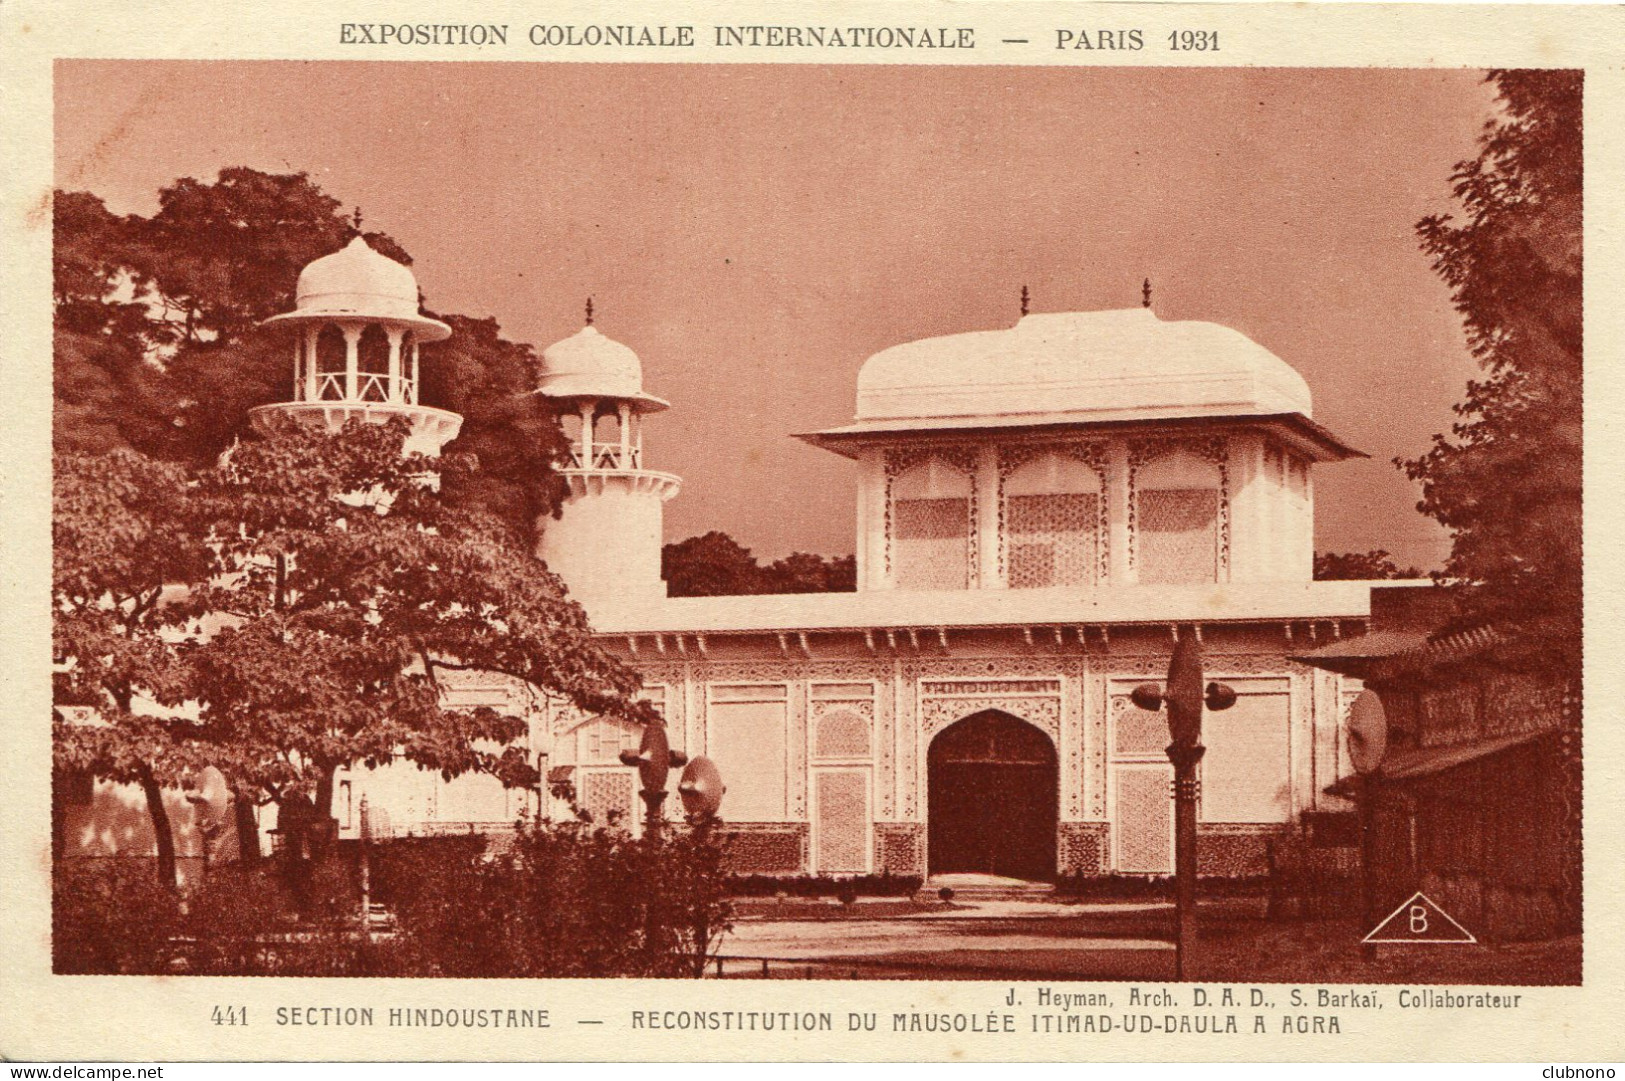 CPA -  PARIS - EXPO COLONIALE  INT. 1931 -  SECTION INDOUSTANE - RECONSTITUTION DU MAUSOLEE ITIMAD-UD-DAULA A AGRA - Mostre